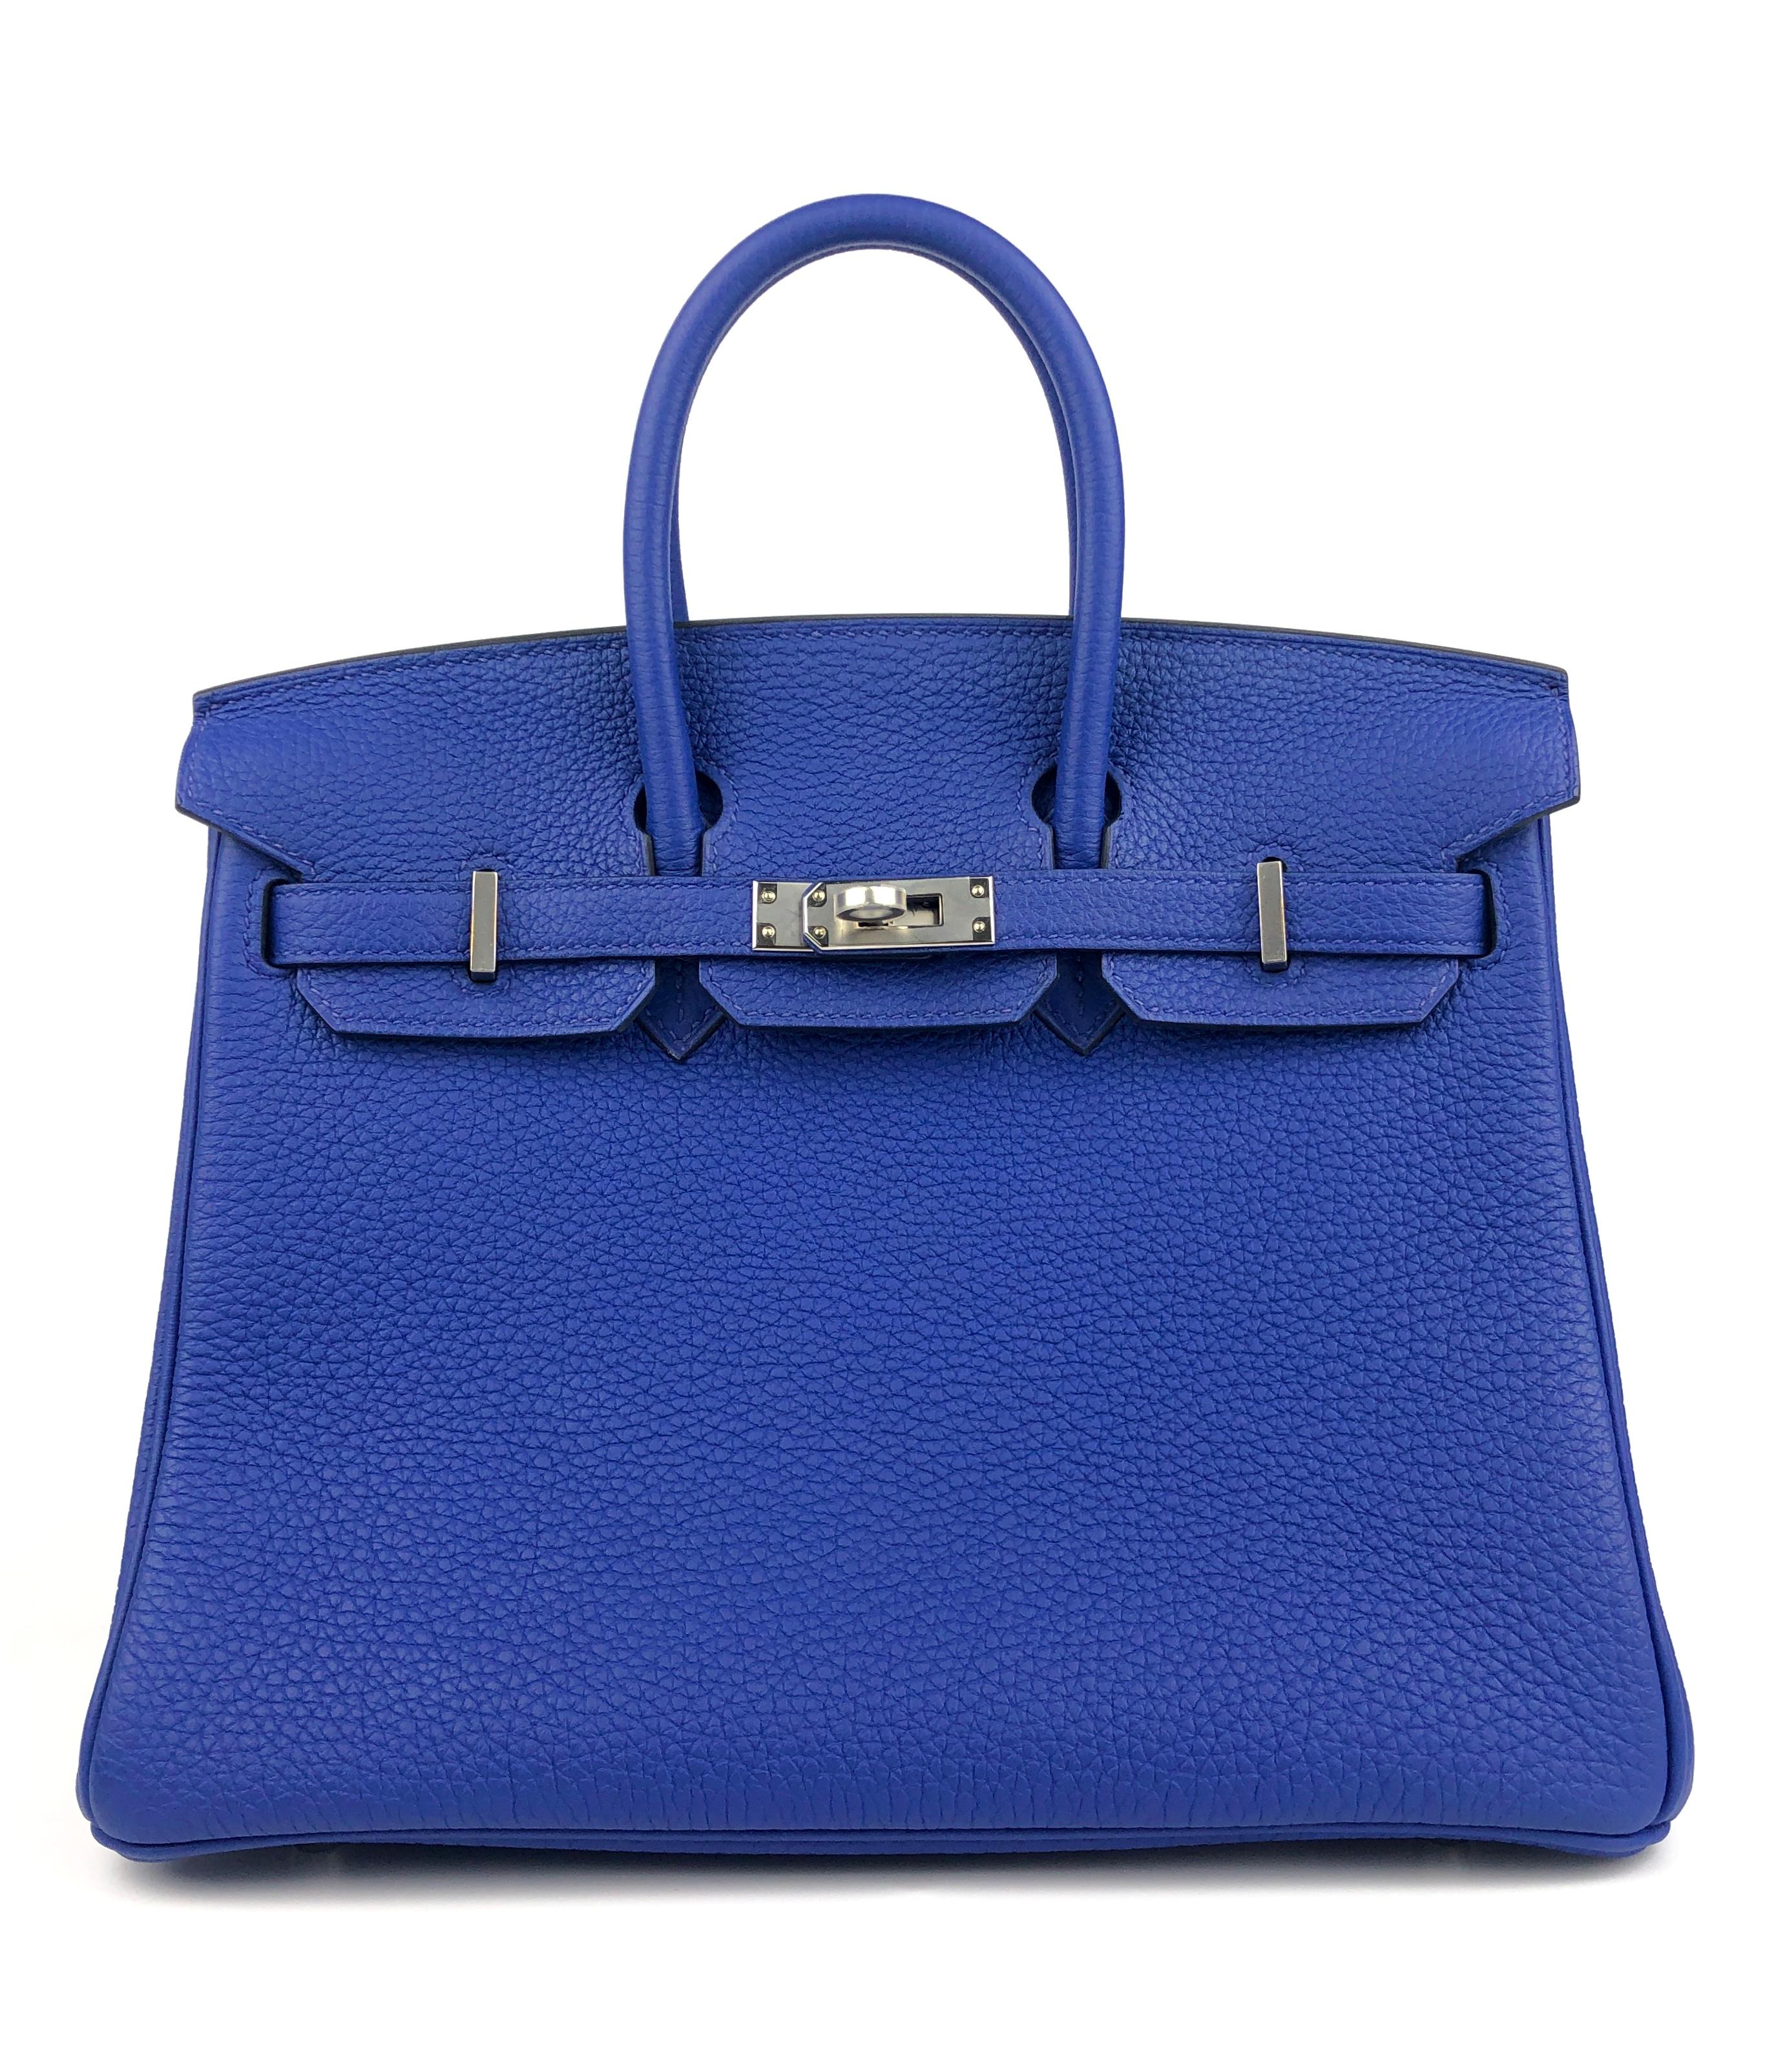 Absolutely Gorgeous As New Hermes Birkin 25 Blue Electric Togo Leather complimented by Palladium Hardware. As New 2017 A Stamp with plastic on all Hardware and Feet.

Shop with Confidence from Lux Addicts. Authenticity Guaranteed!